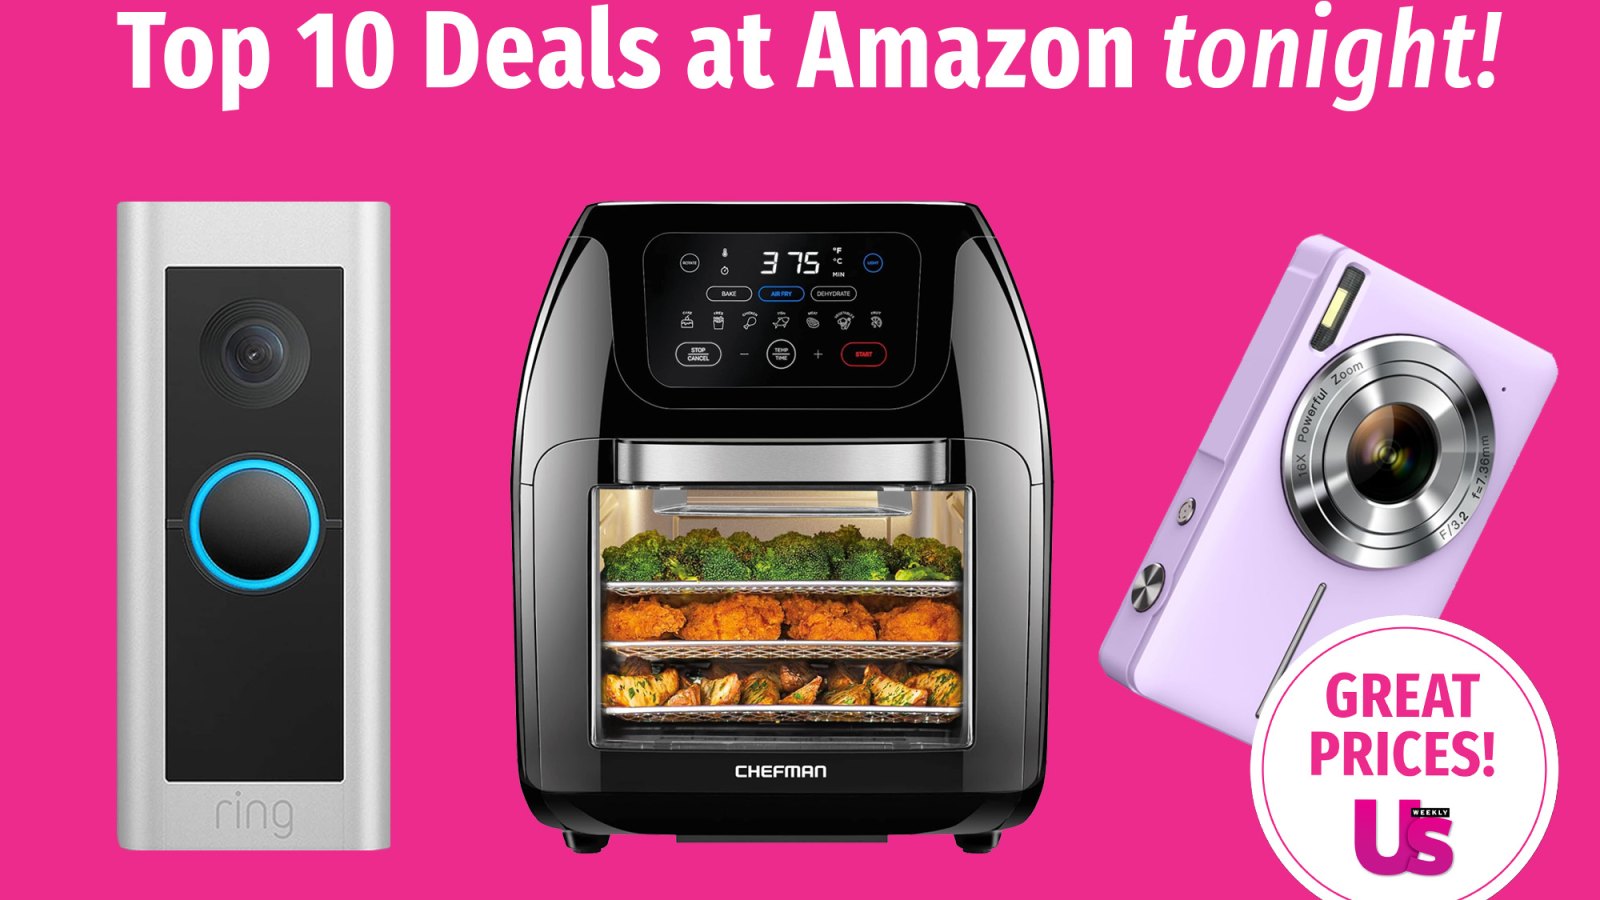 I’m a Shopping Writer and These Are the 10 Best Amazon Deals Tonight From $50 to $100